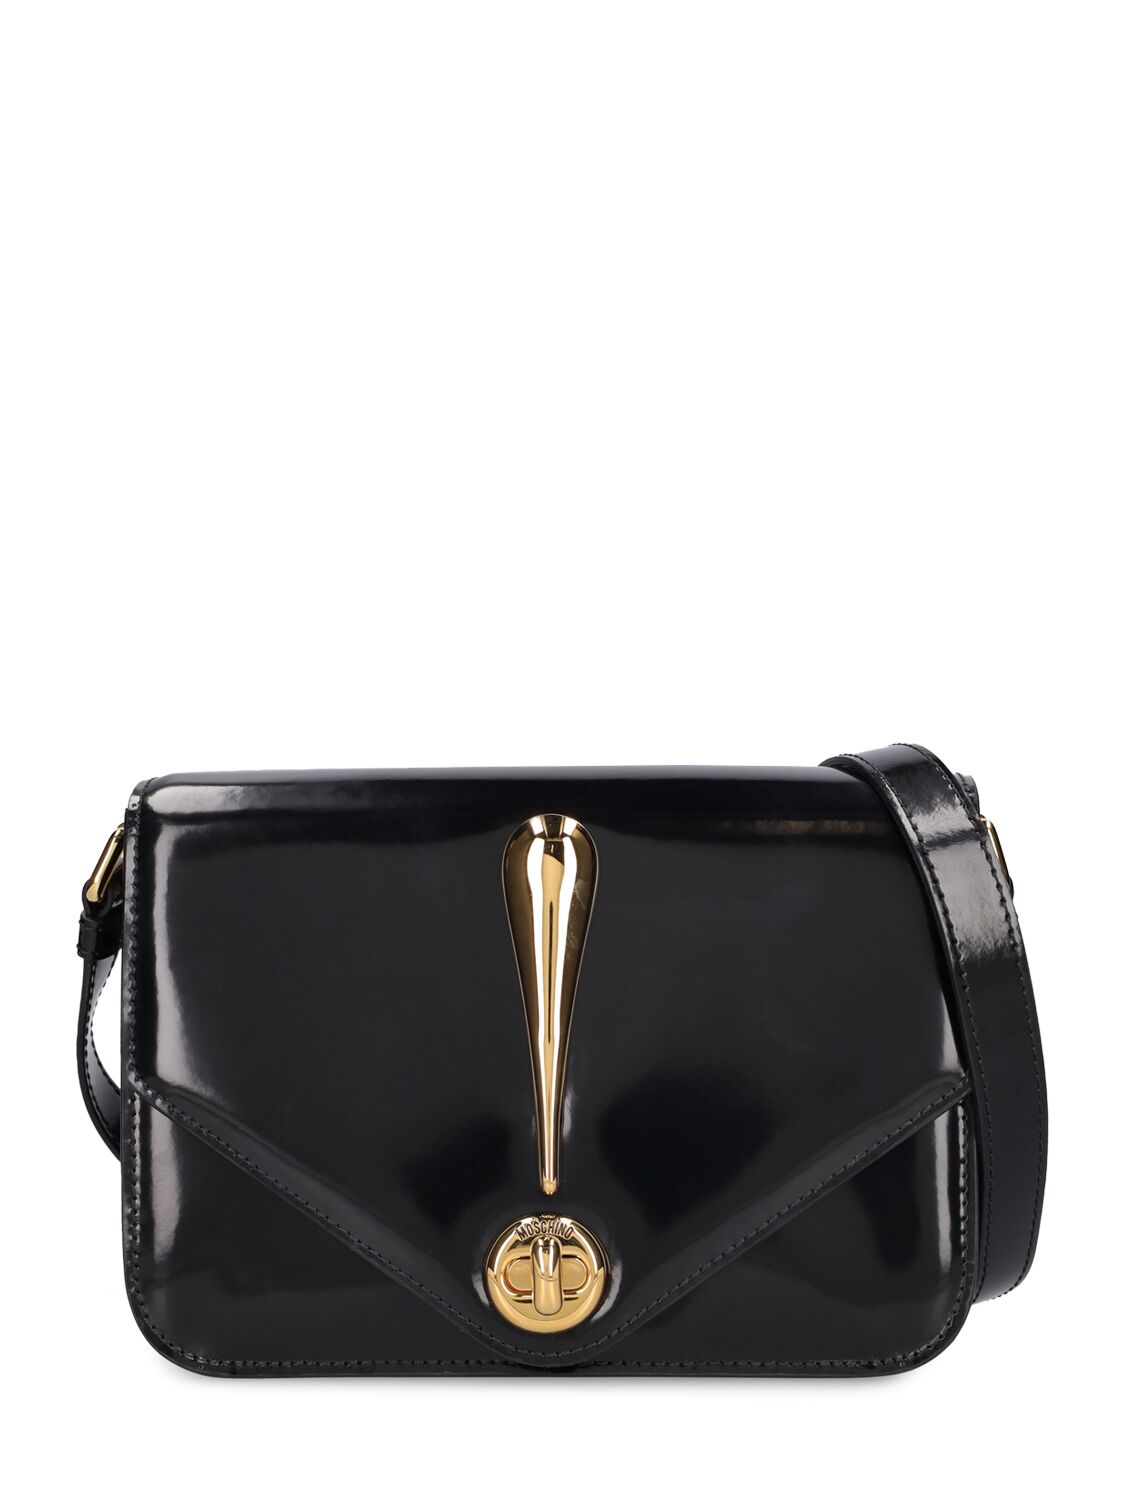 Moschino Gone With The Wind Leather Shoulder Bag In Black